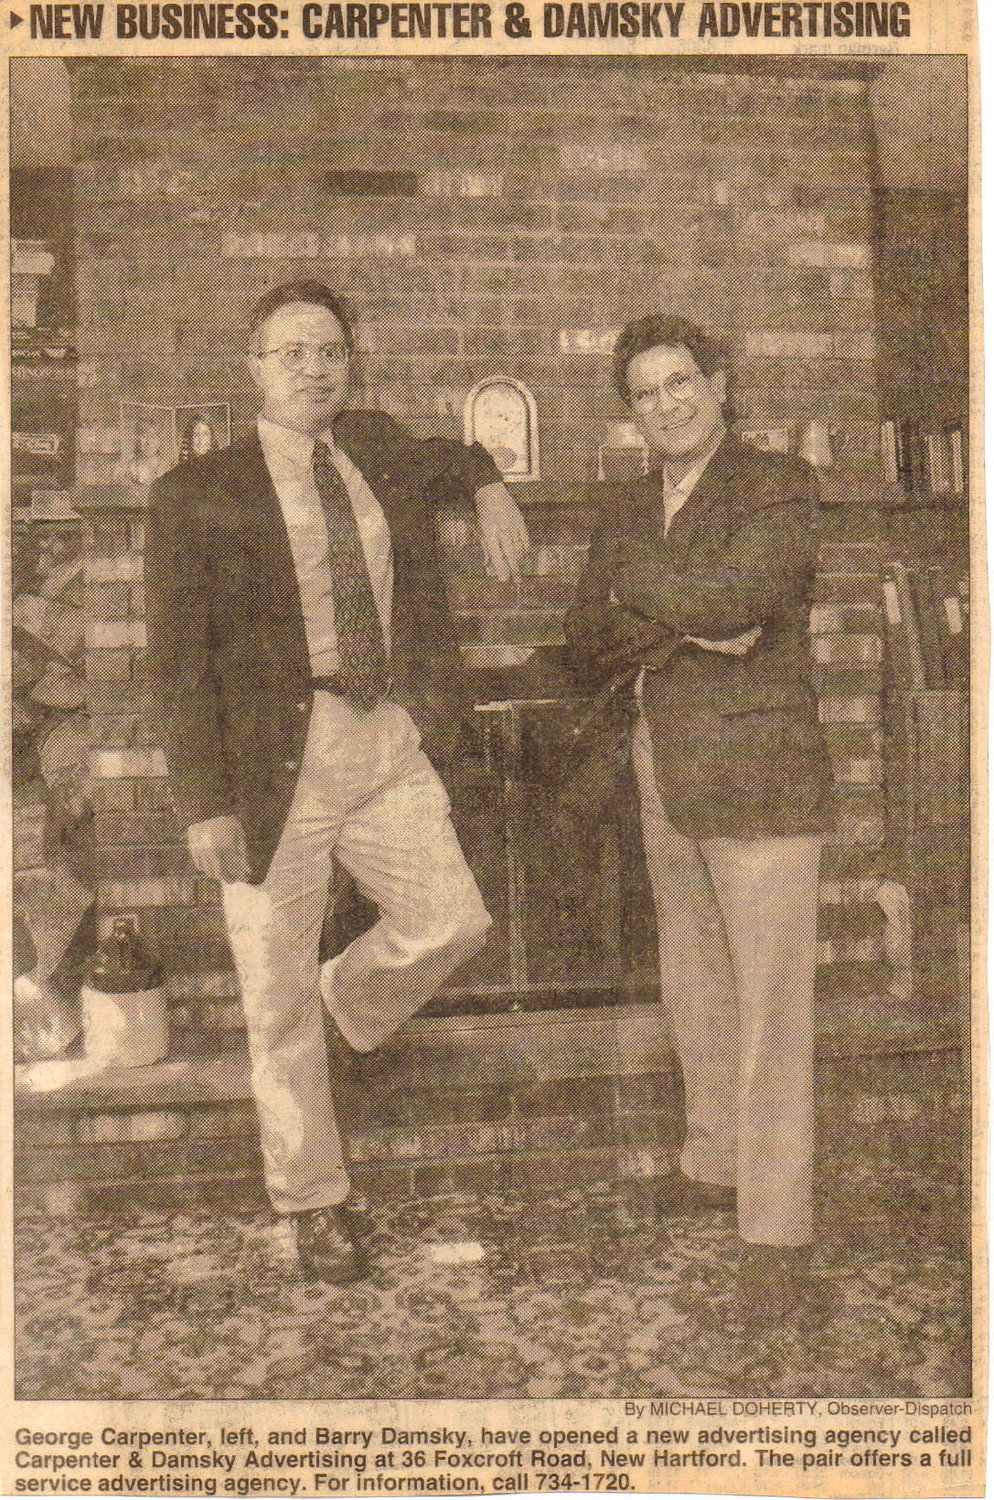 C &amp; D Advertising founders George Carpenter, left, and Barry Damsky are shown in this 1997 news clipping announcing the startup of their advertising agency.